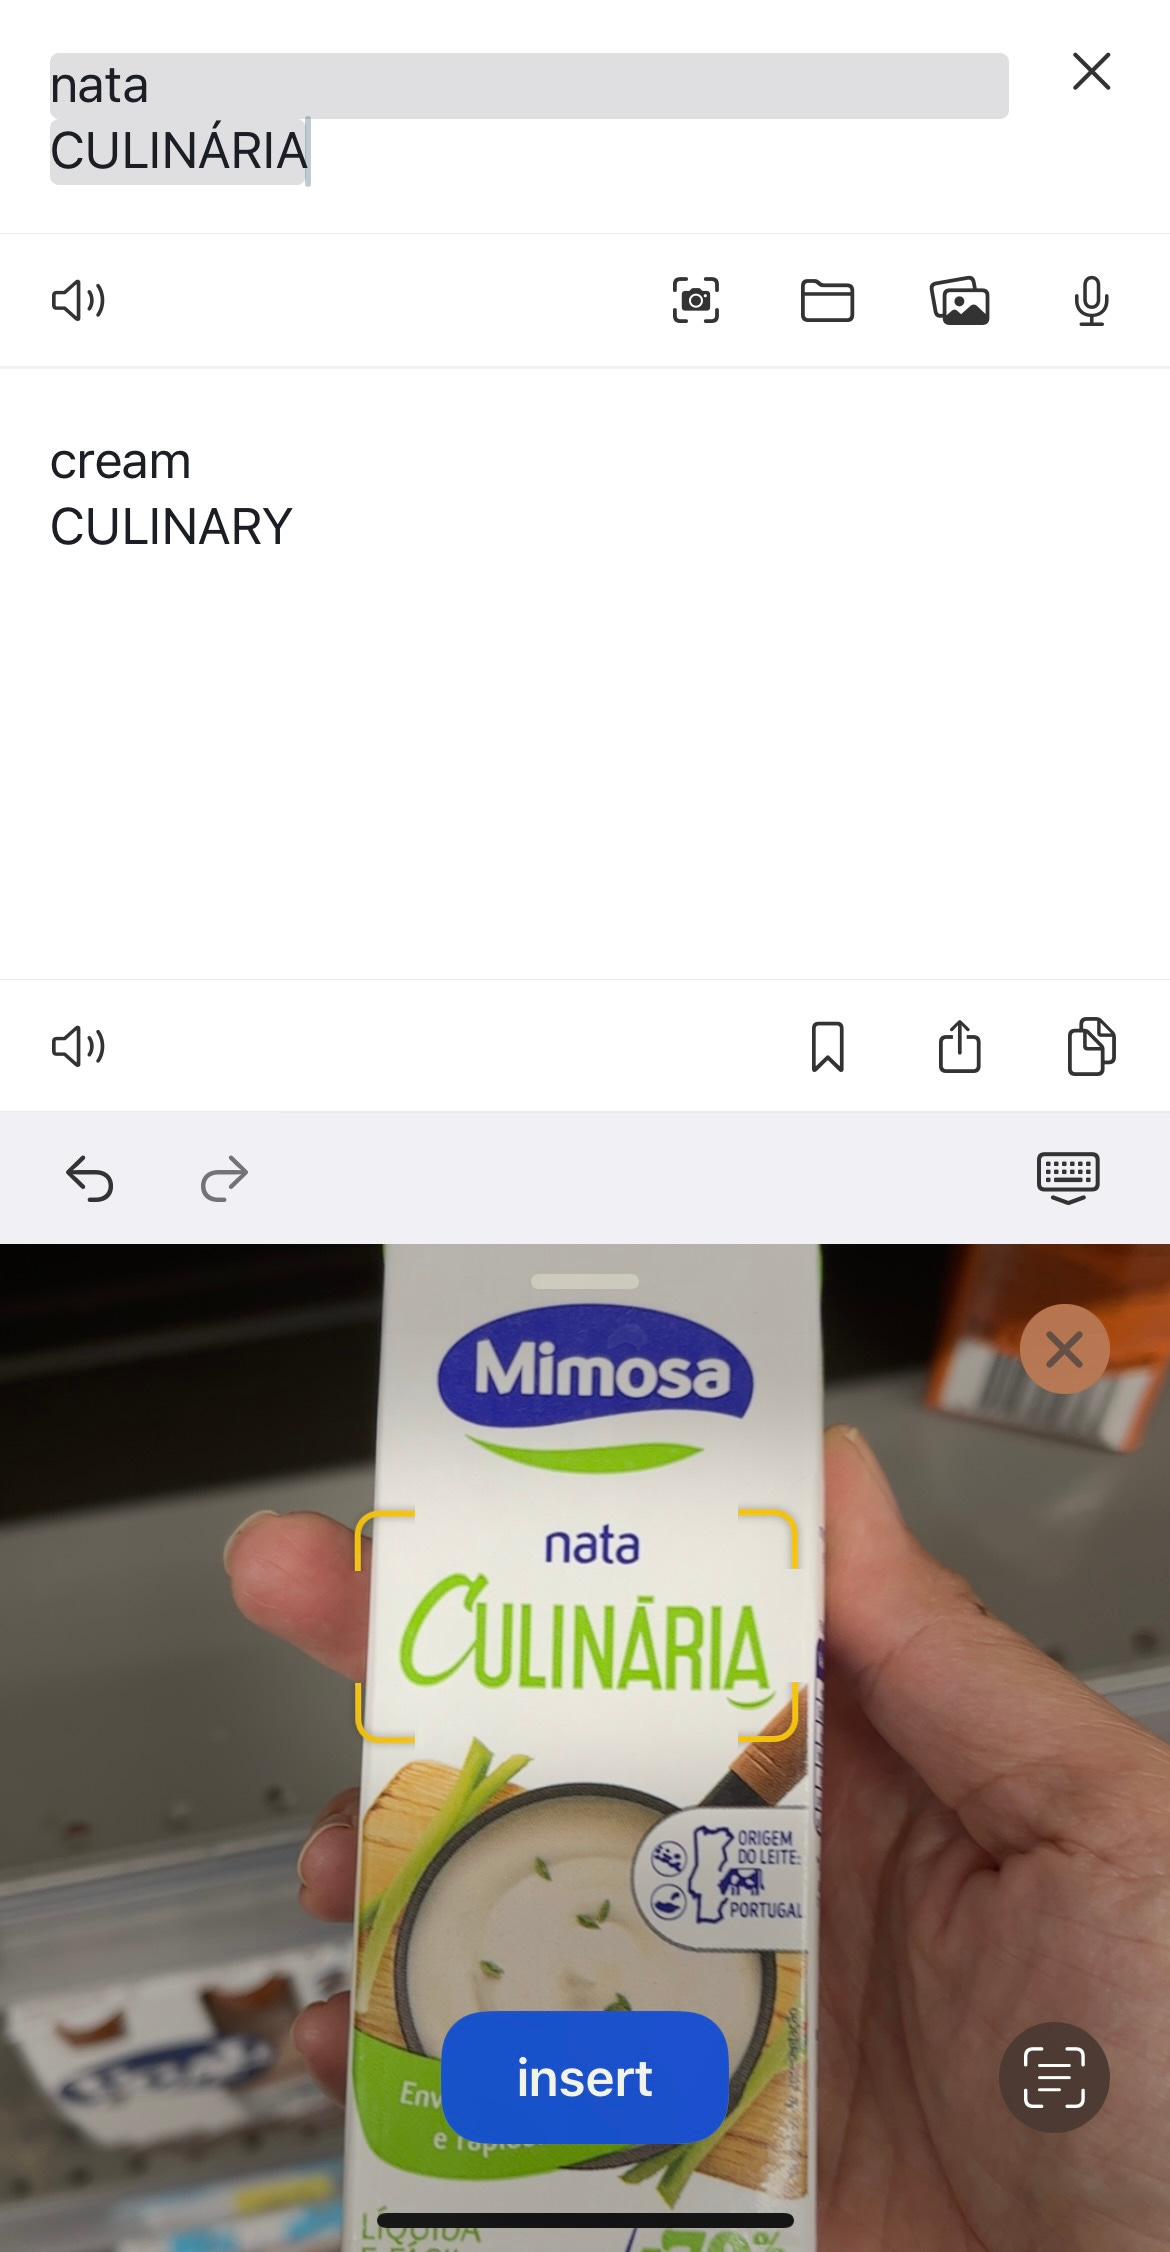 Image: using a translation app to scan and translate the words on a packet of cream.